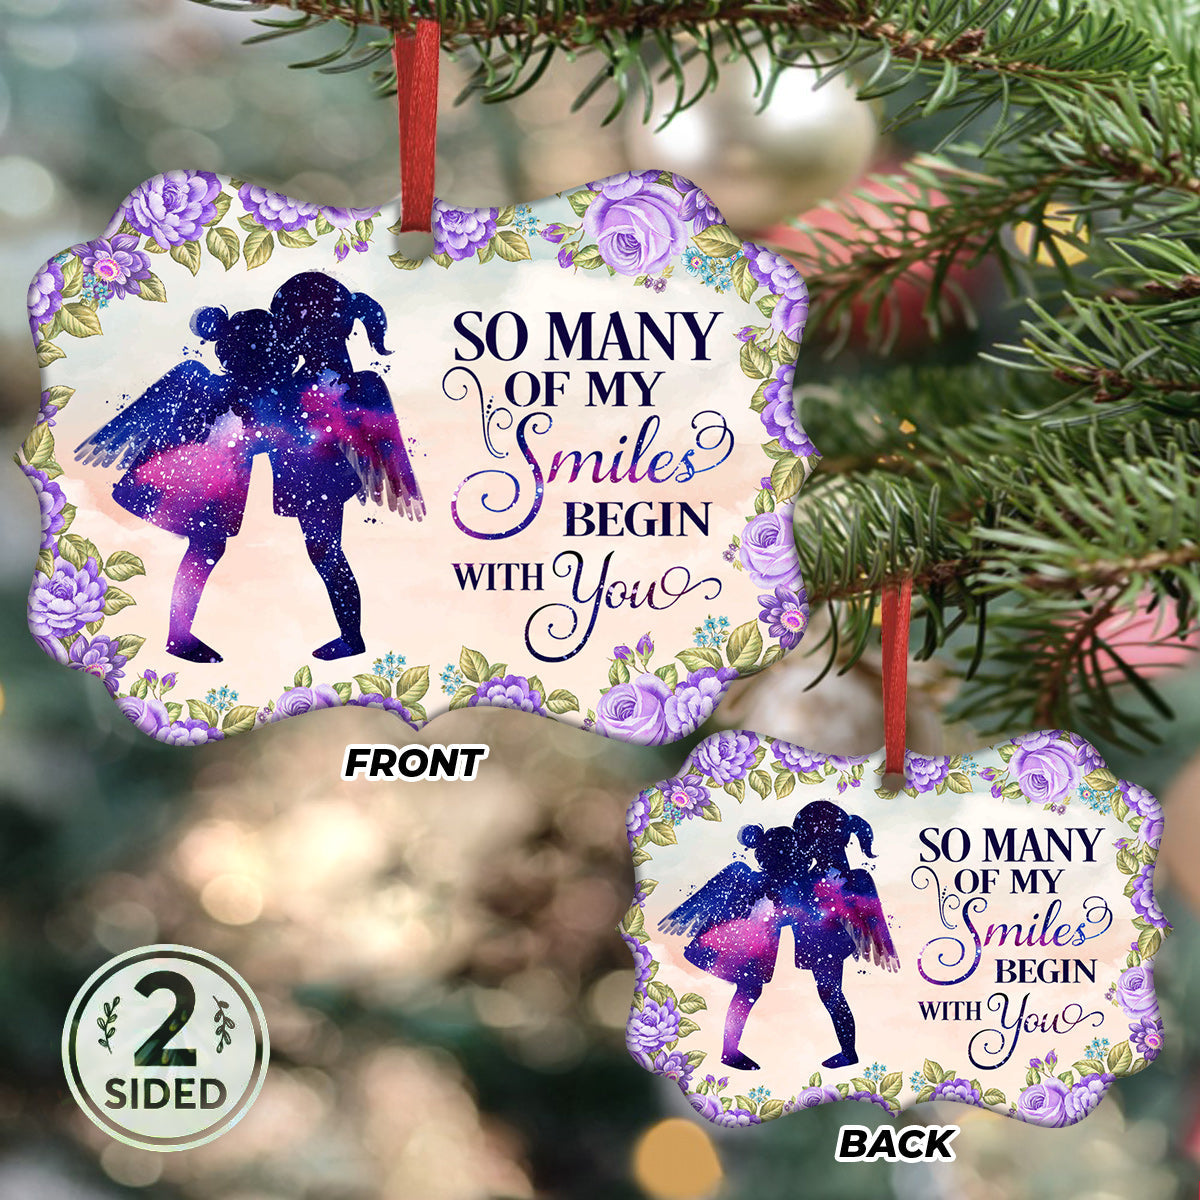 Sister Angel So Many Of My Smiles Begin With You Metal Ornament - Christmas Ornament - Christmas Gift